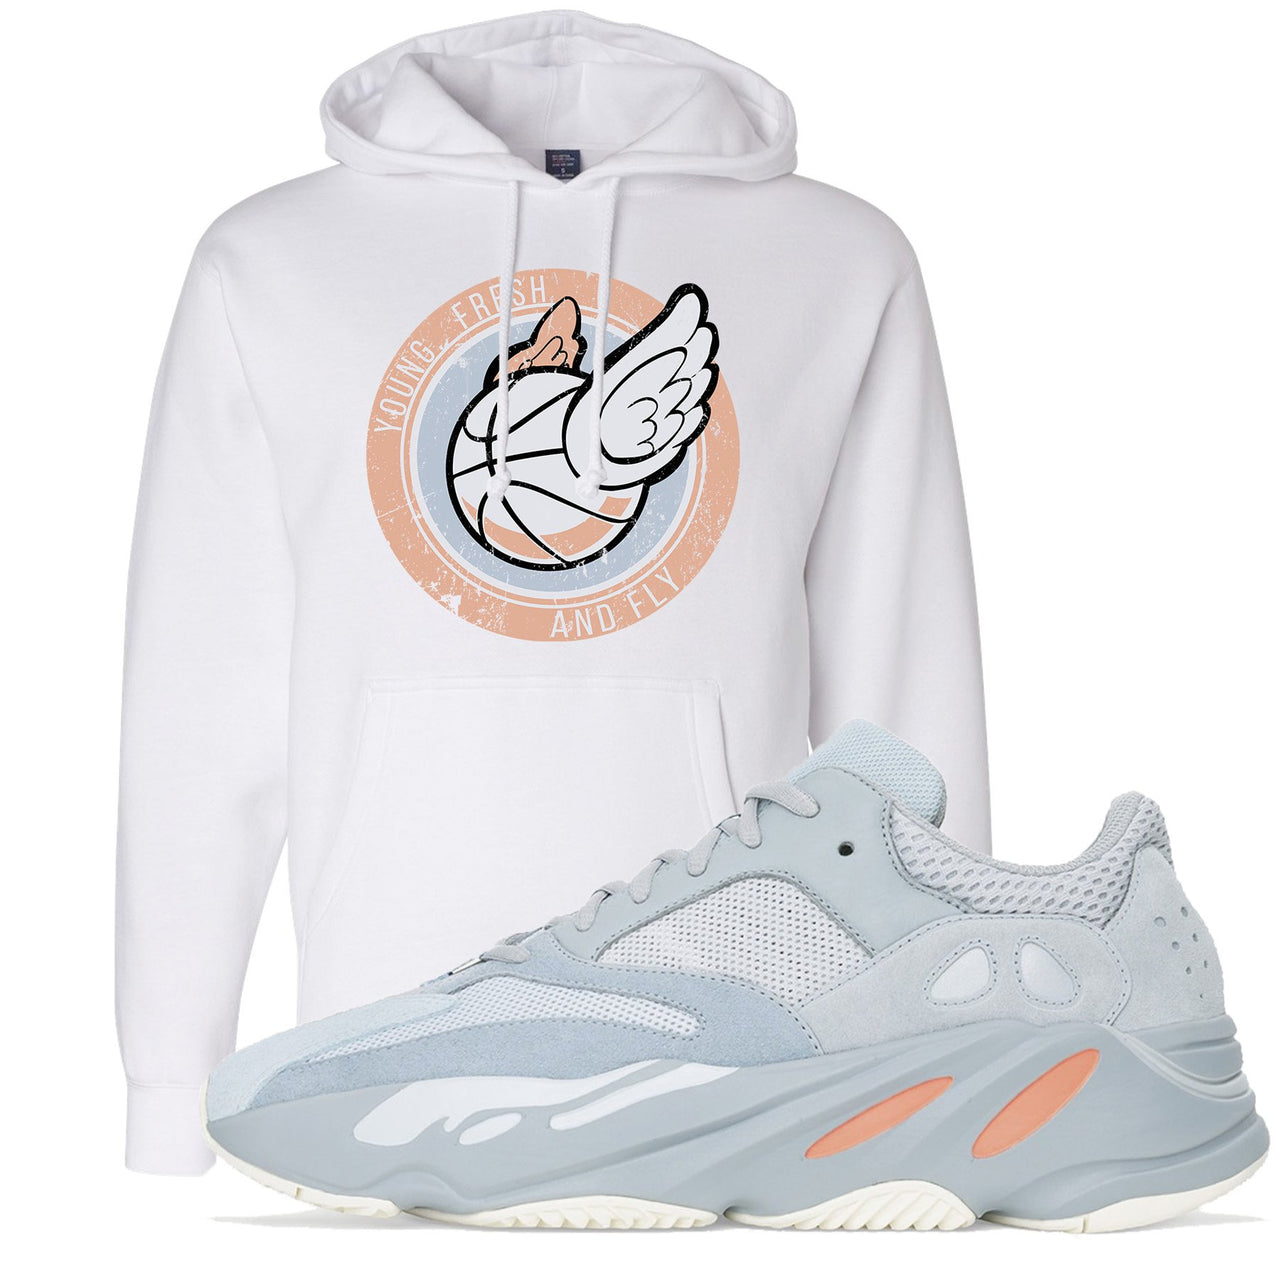 Inertia 700s Hoodie | Young Fresh and Fly, White